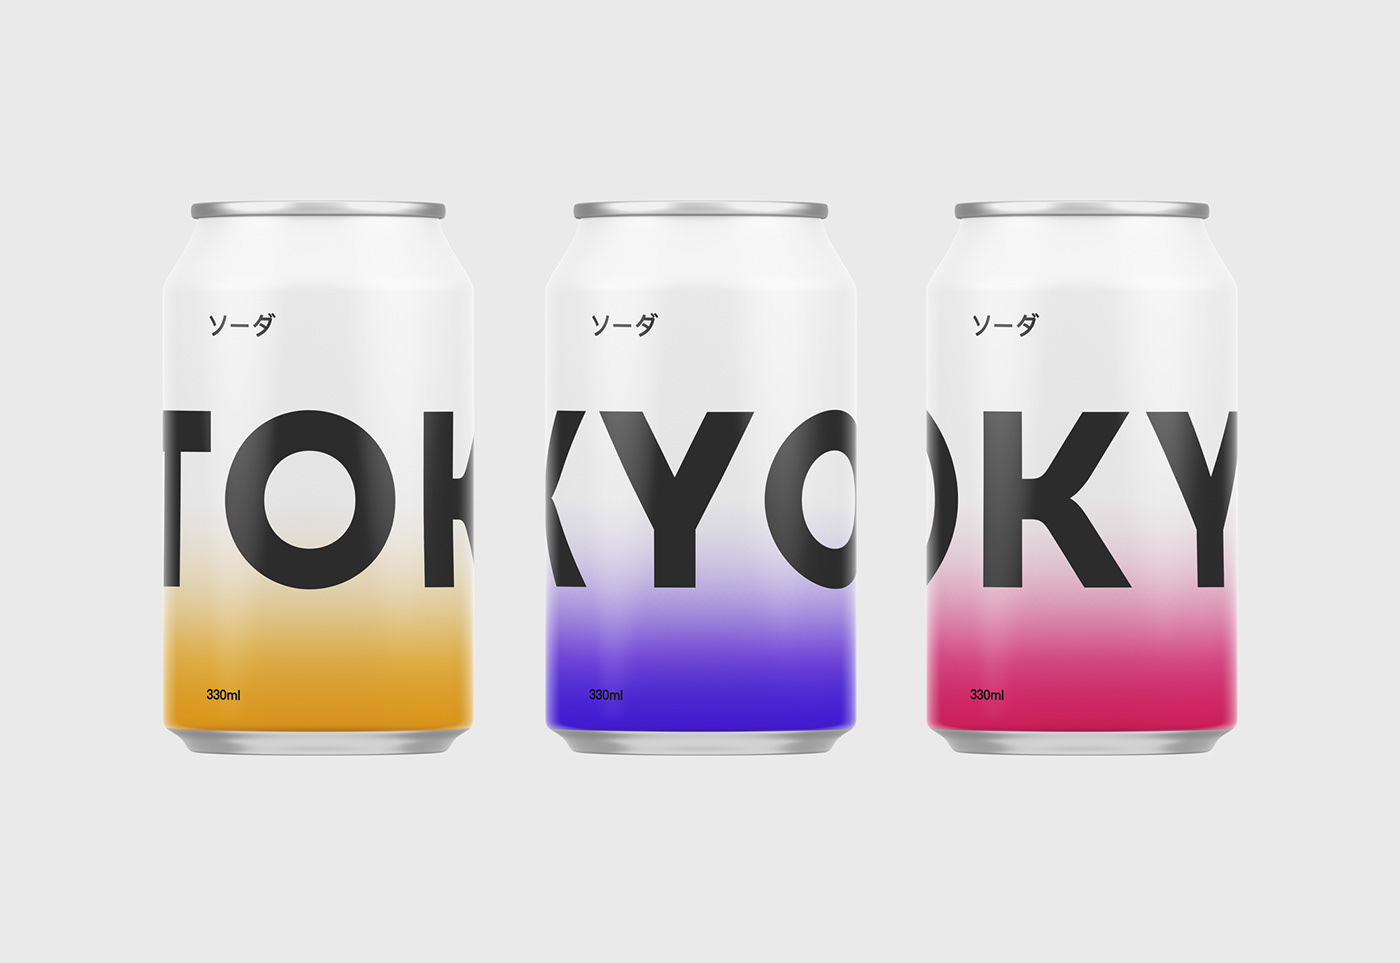 can download drink Mockup psd soda template